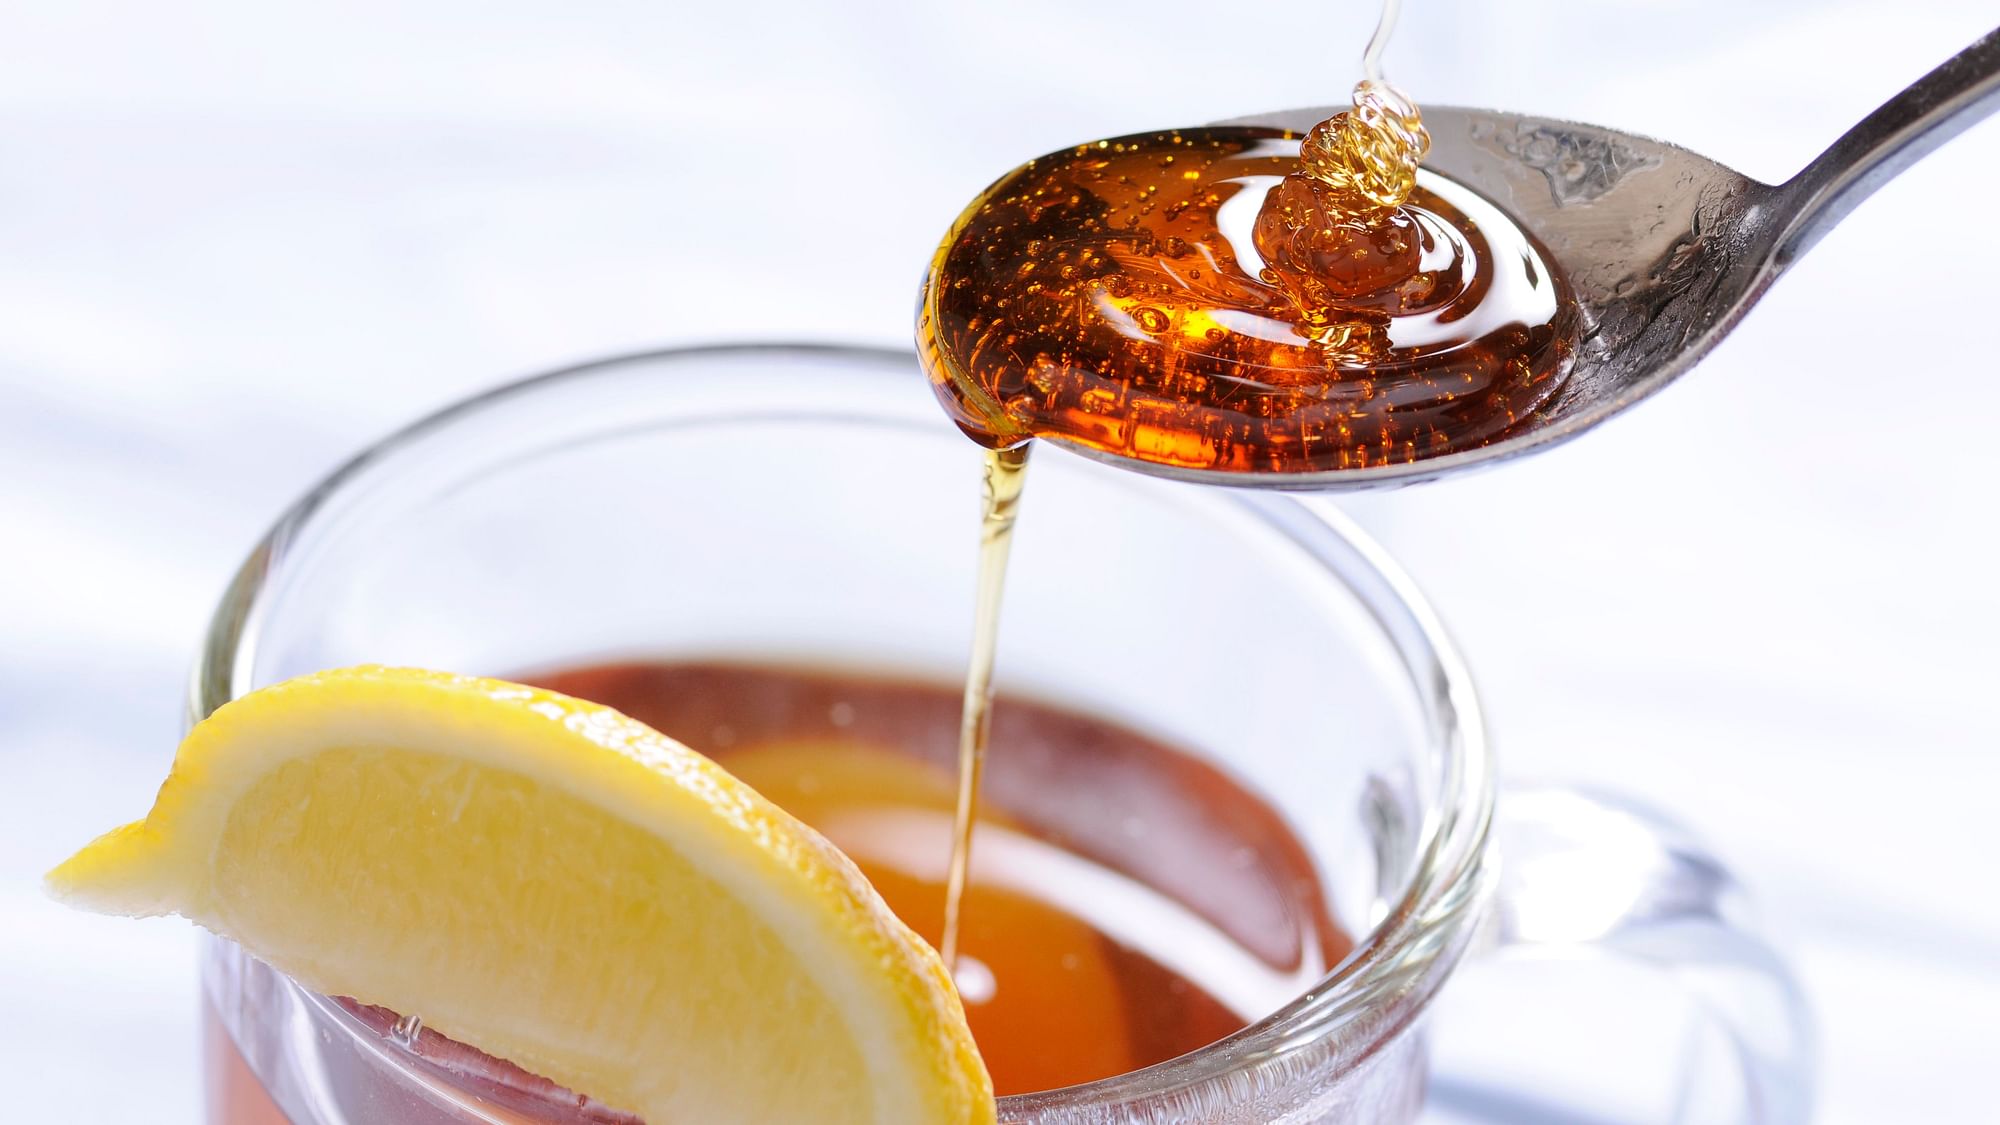 Honey may be basically just sugar, but here’s why its still better.